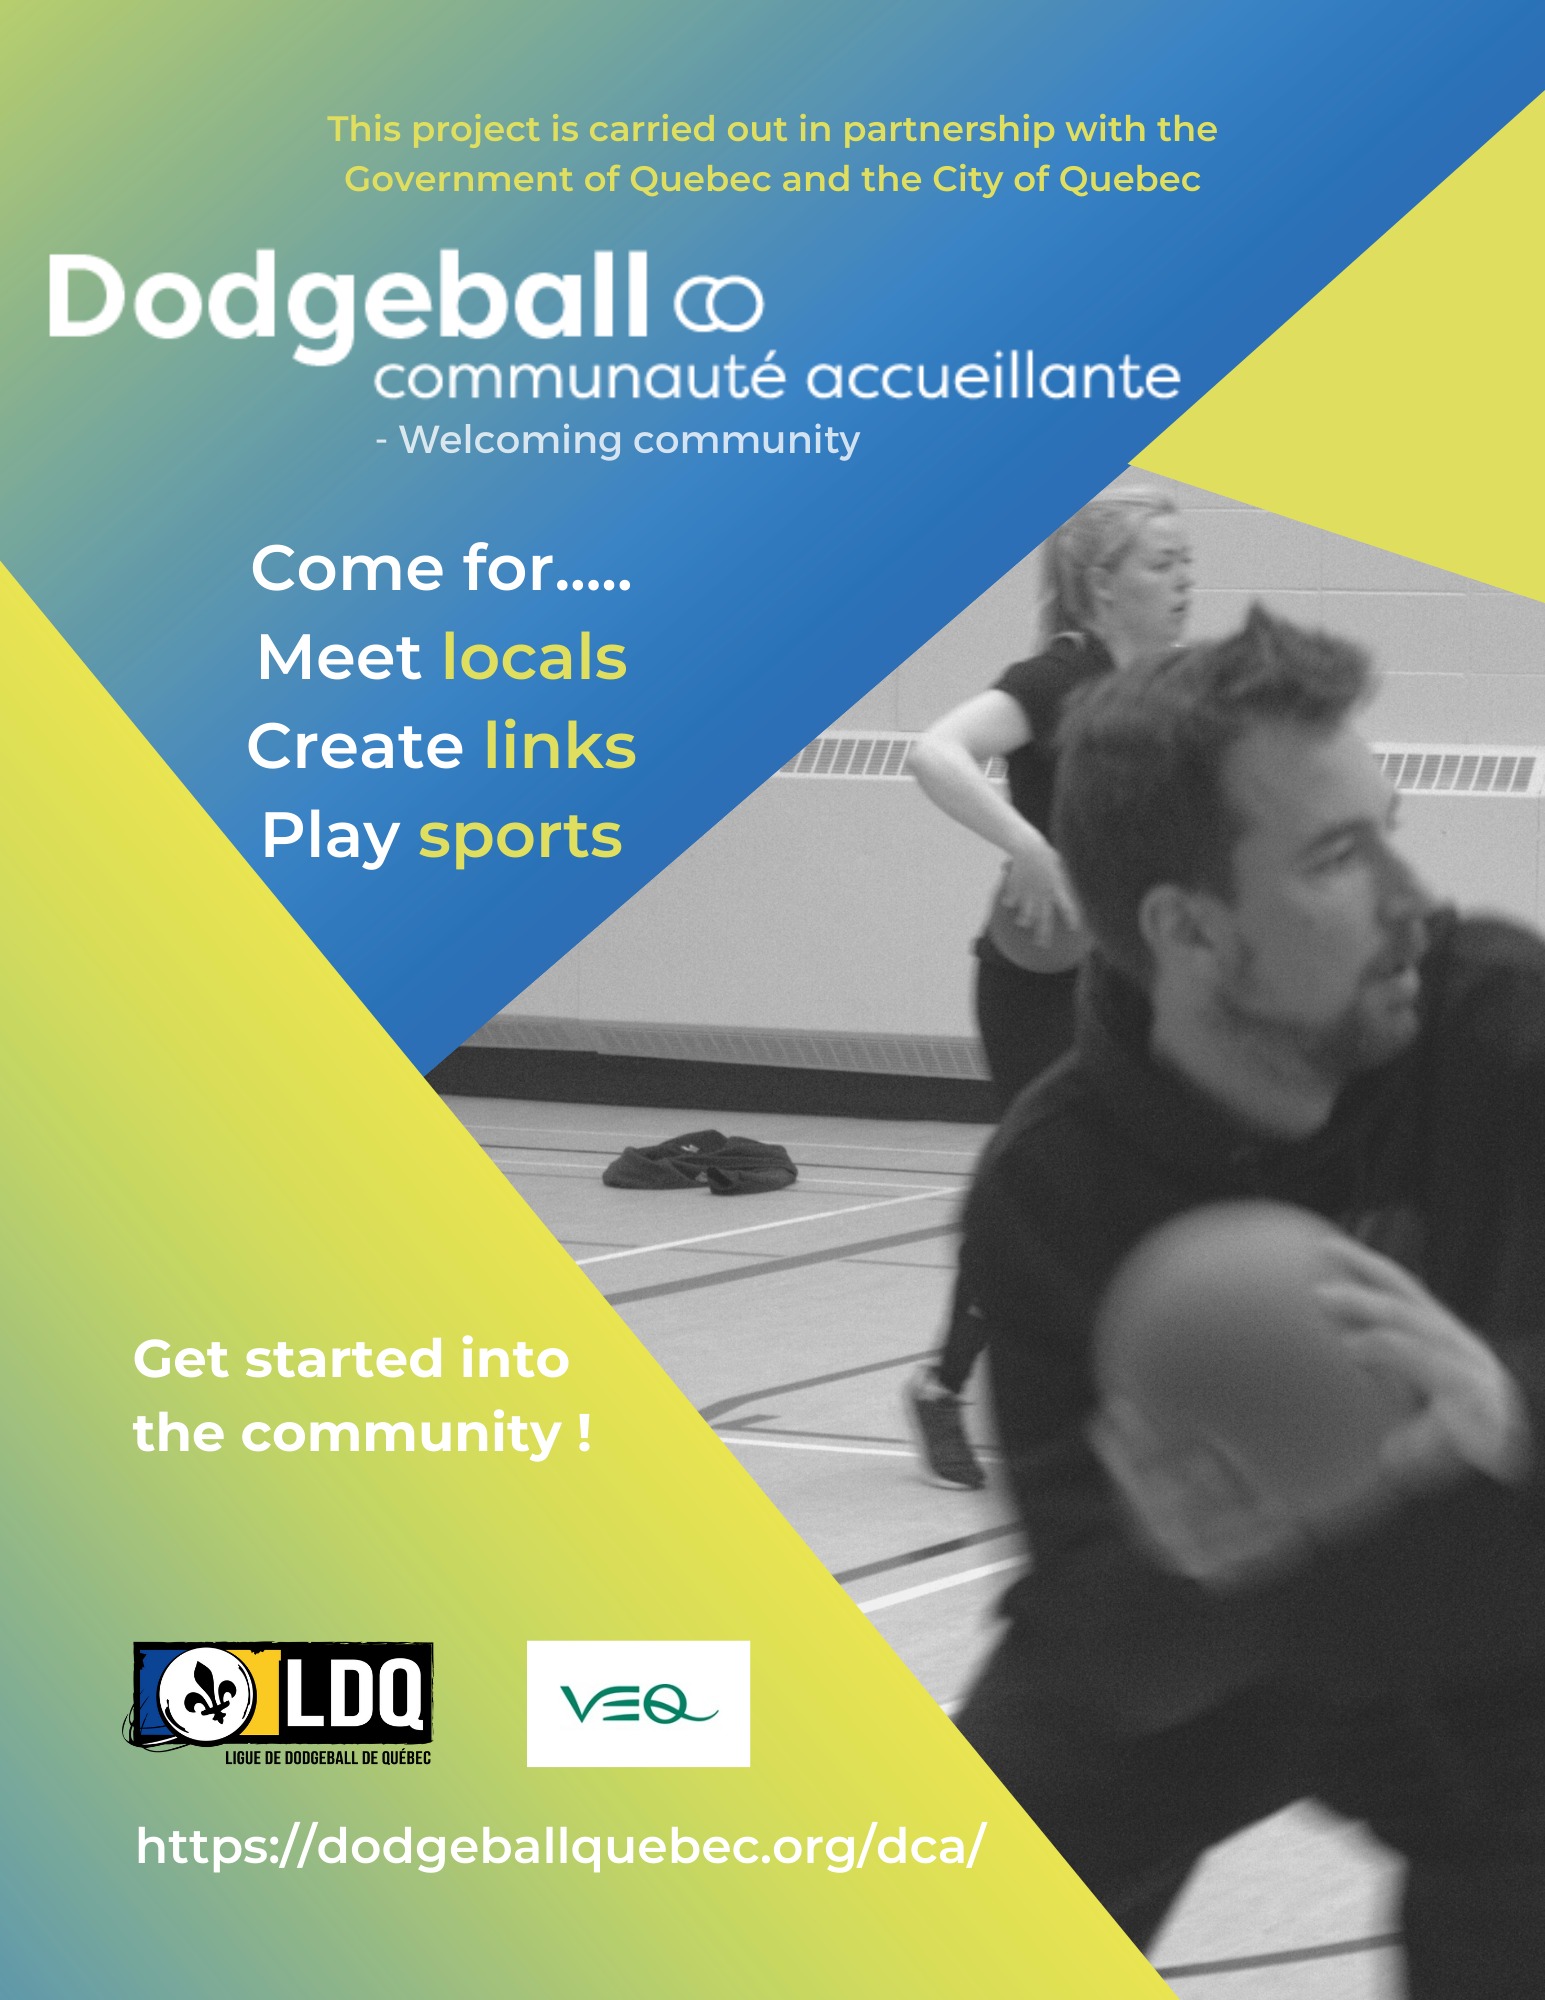 Dodge ball initiation sessions for Newcomers @ Parc Victoria, Québec